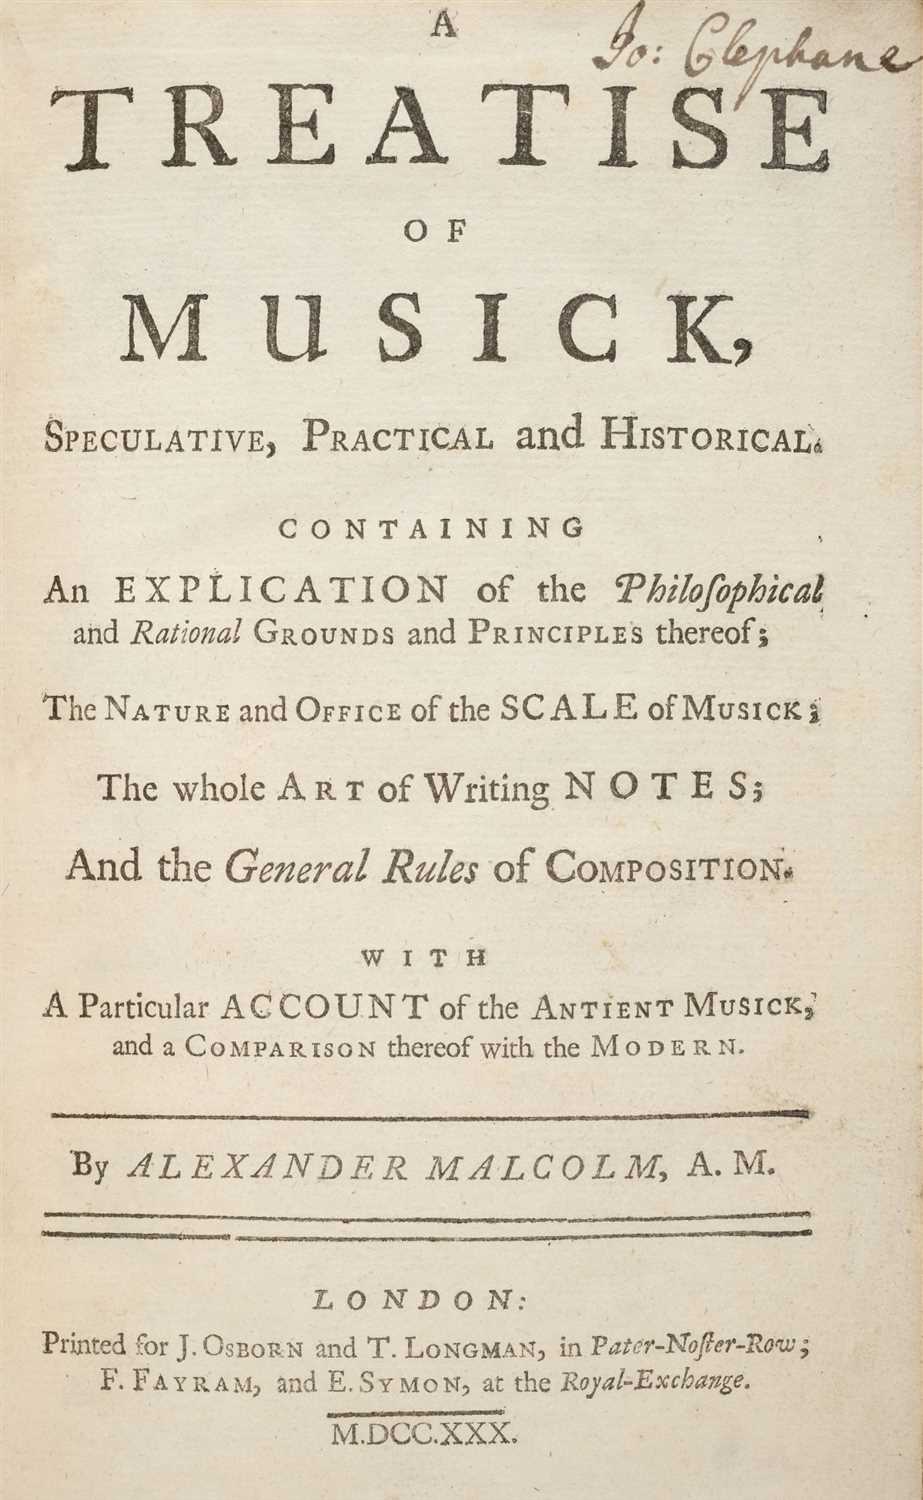 Lot 162 - Malcolm (Alexander). A Treatise of Musick, 1730